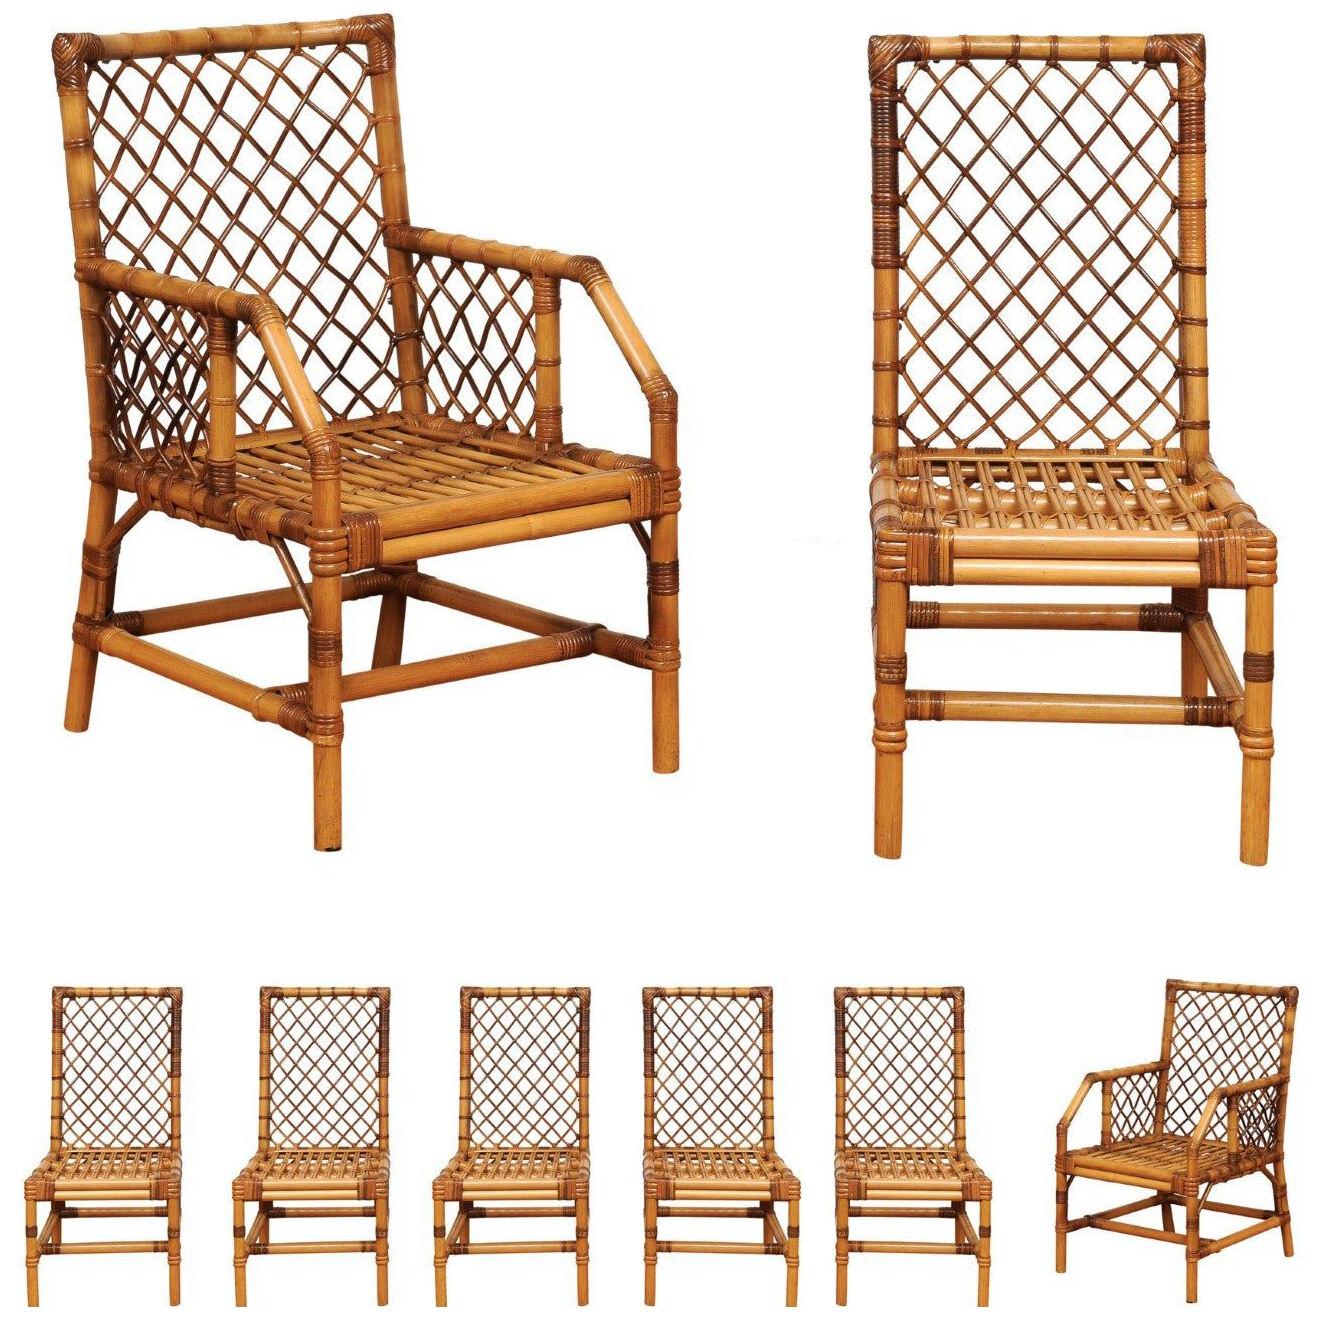 Stellar Set of 8 Rattan and Cane Dining Chairs by Bielecky Brothers, circa 1975